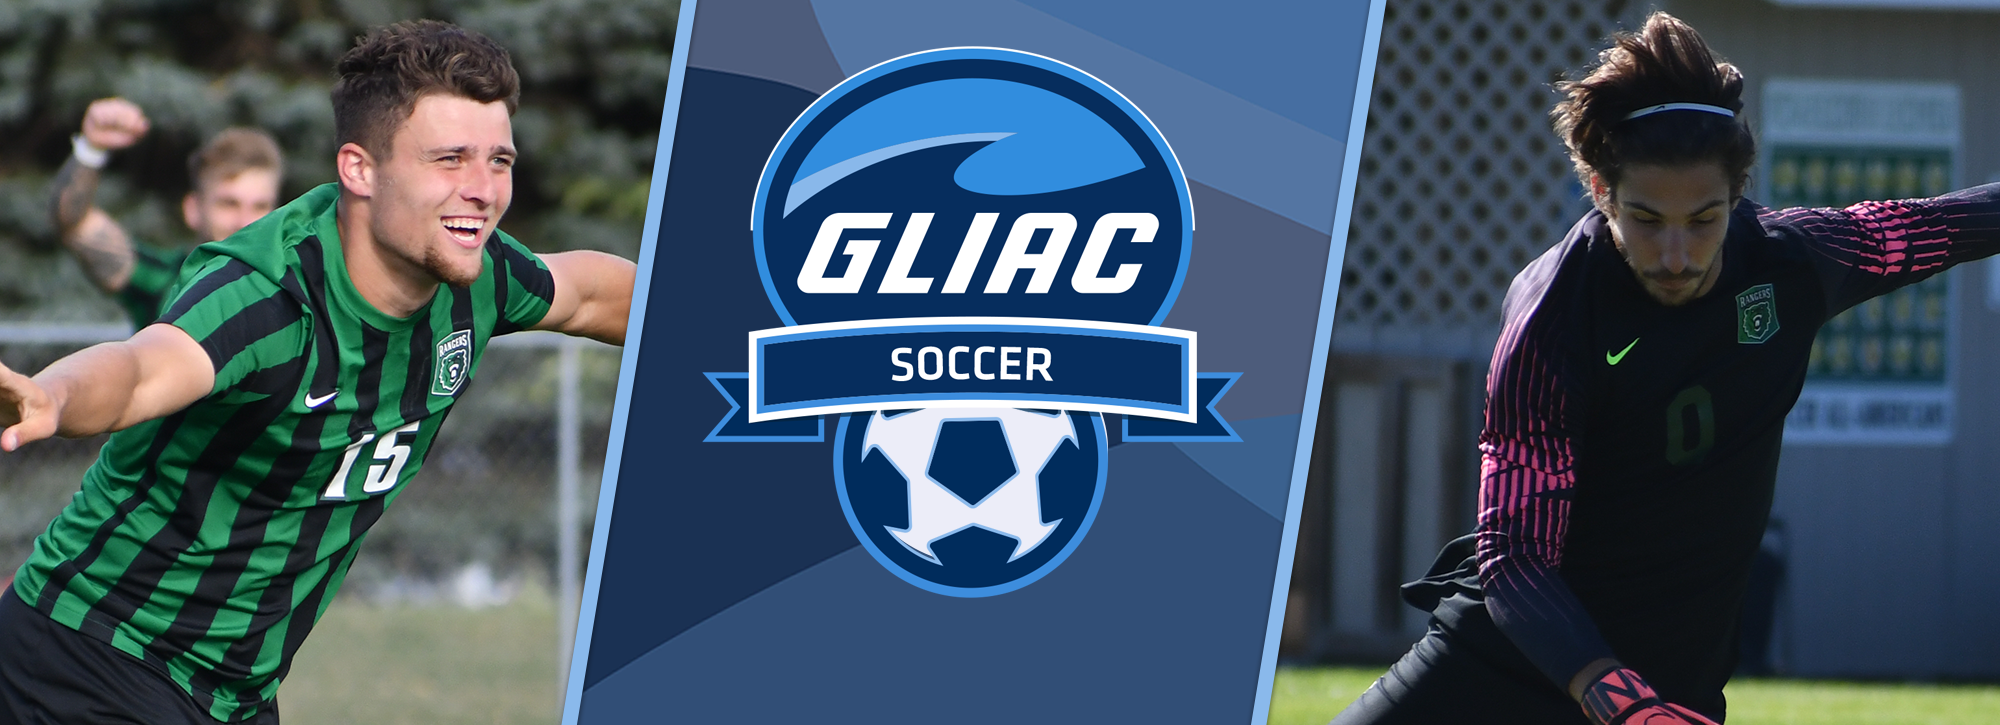 Parkside's Novakovich and Durand honored with GLIAC men's soccer weekly awards